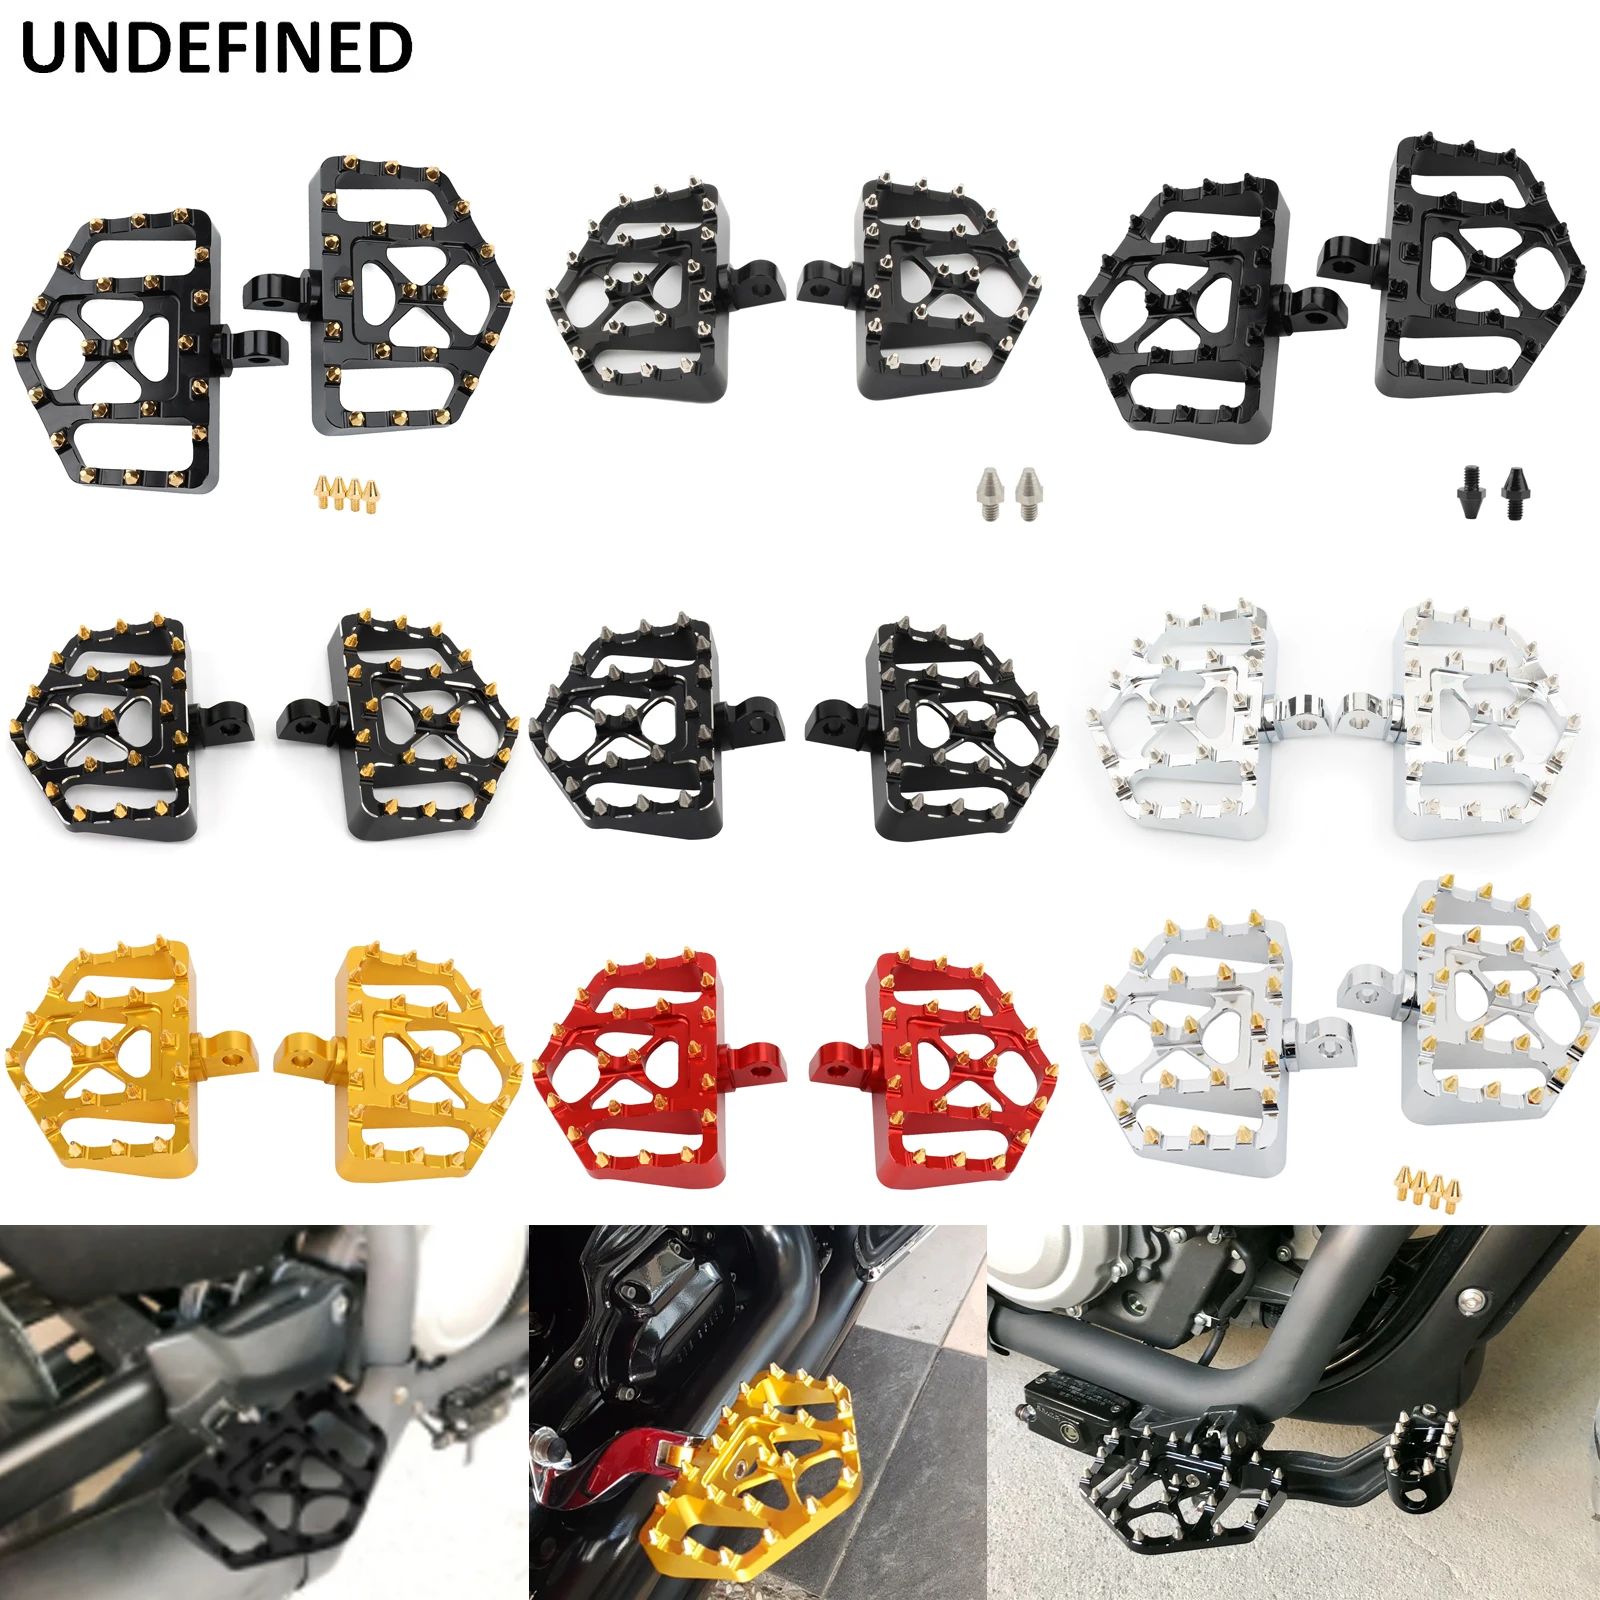 Enlarge MX Foot Pegs Motorcycle Wide Fat Floorboards Chopper Footrests For Harley Dyna Sportster 883 1200 Softail Fatboy Street Bob Slim